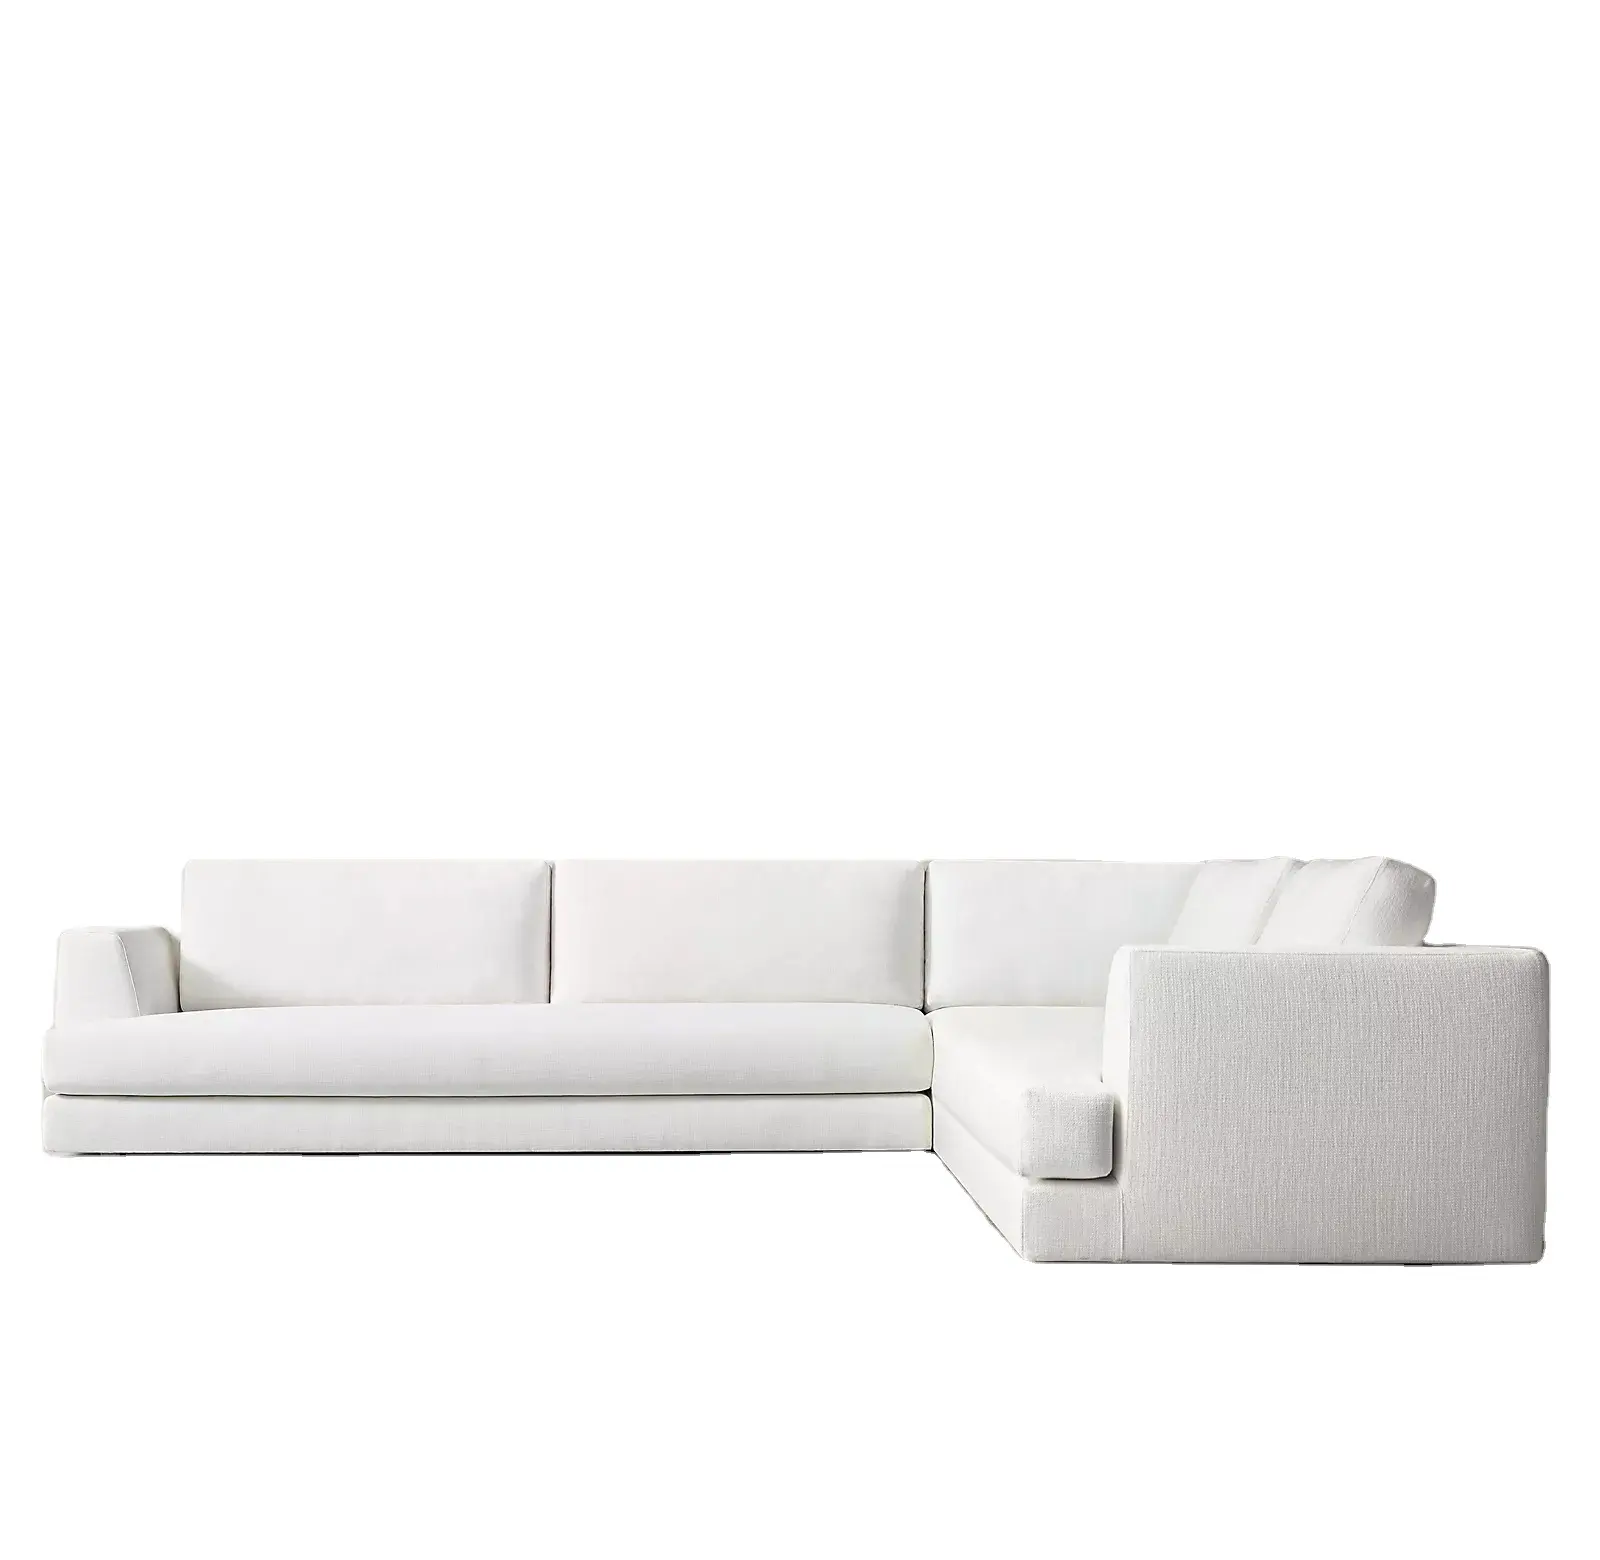 Living room furniture sofa home furniture subtle curves and down-blend cushions with beveled block arms sofa sectional